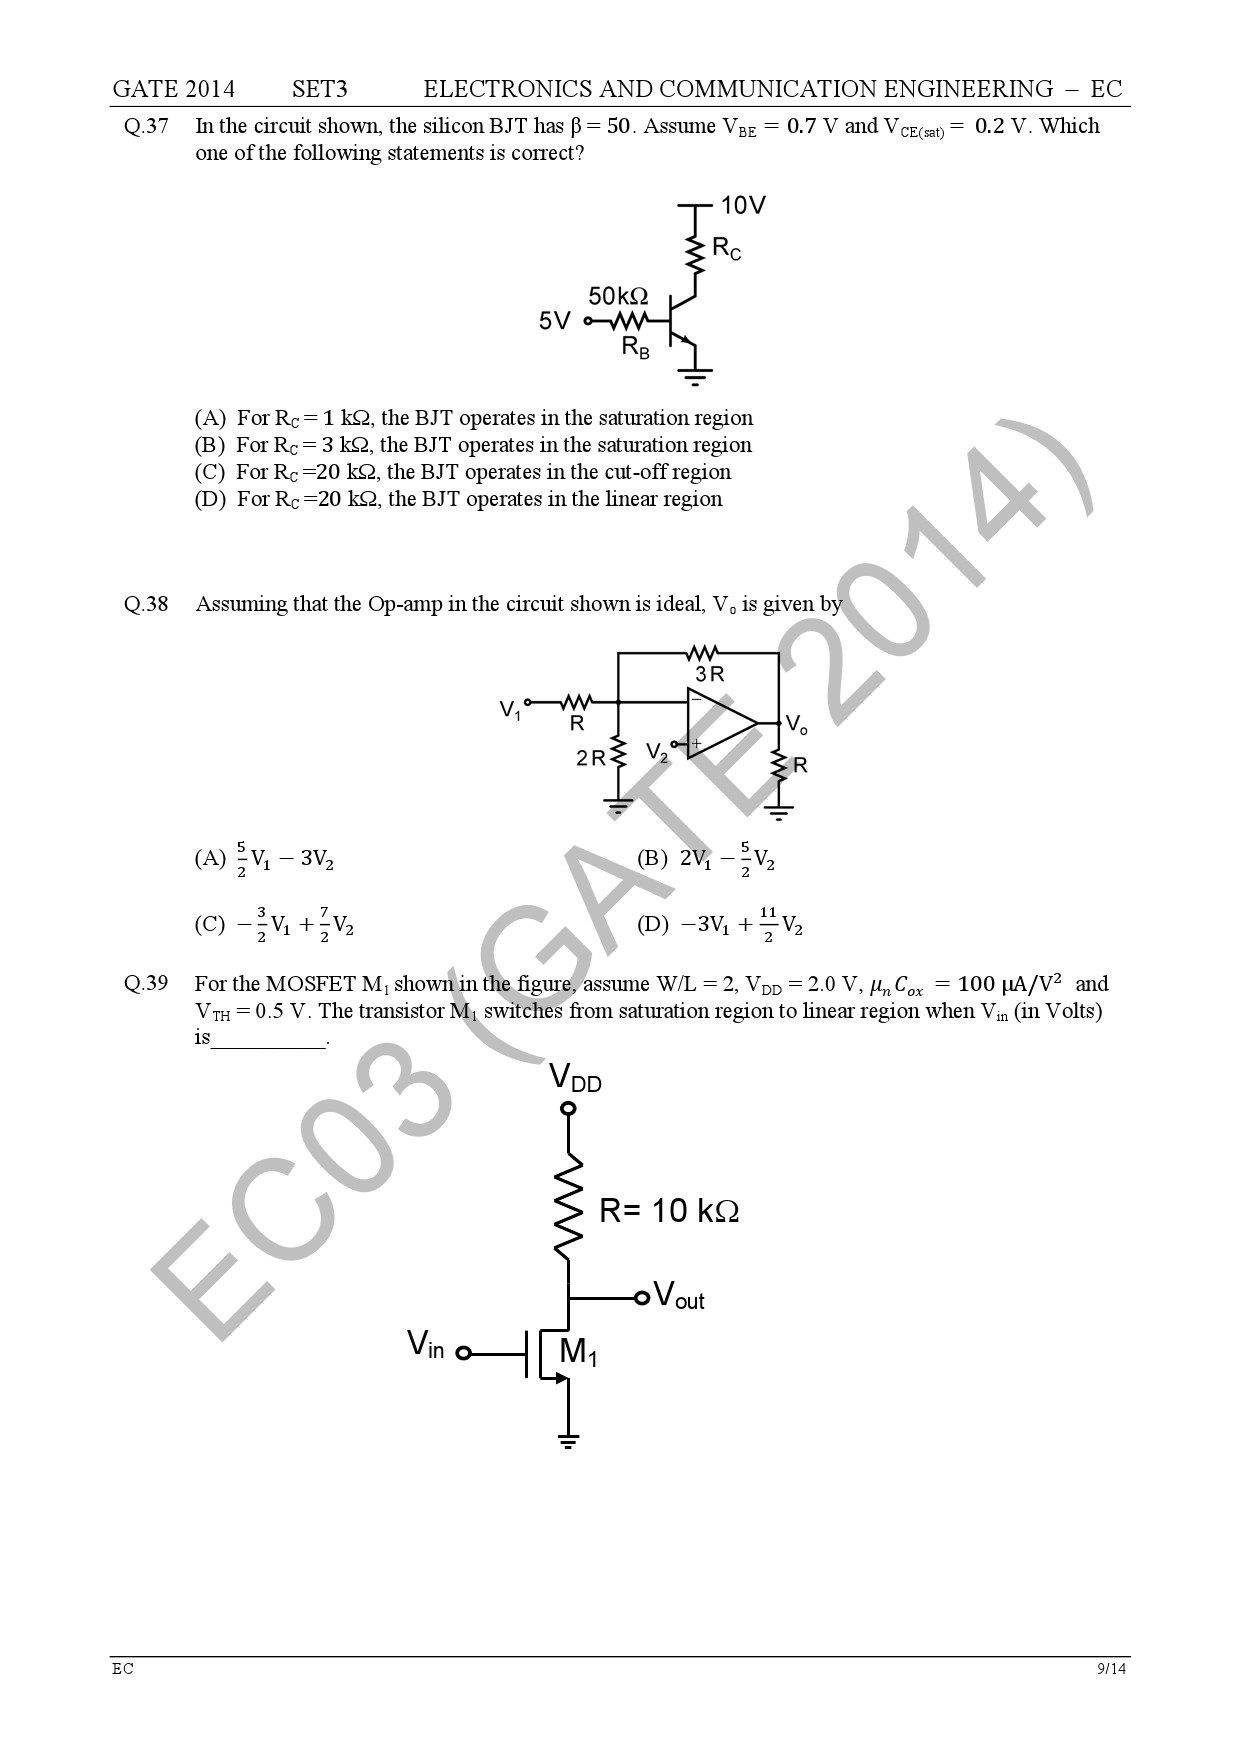 GATE Exam Question Paper 2014 Electronics and Communication Engineering Set 3 16